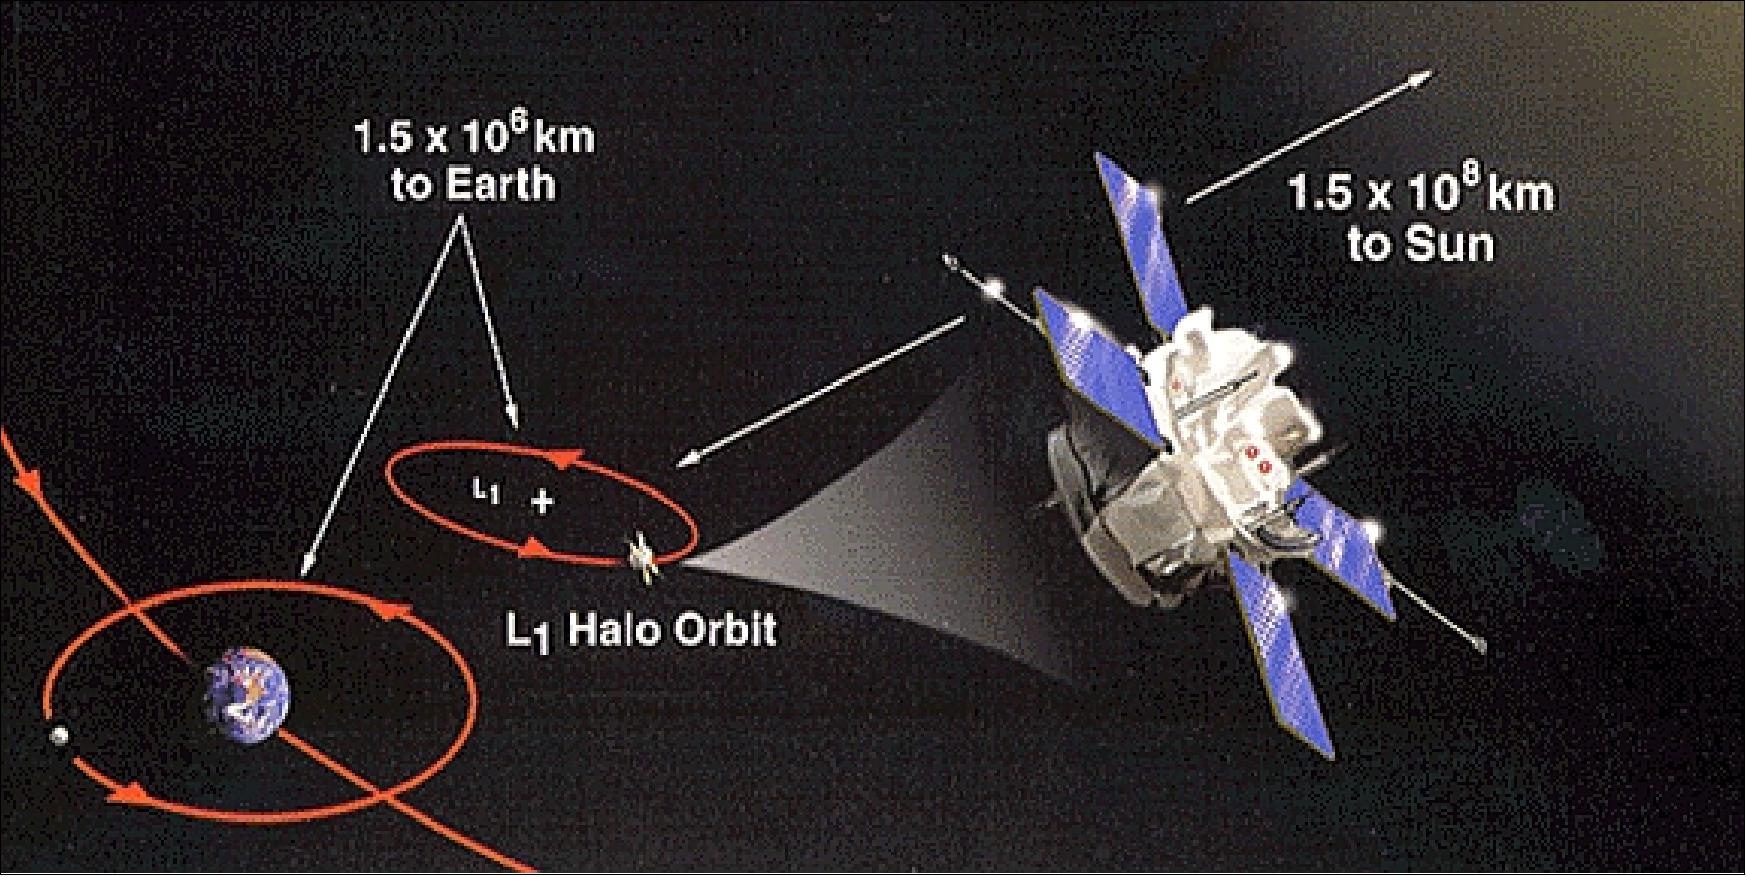 Figure 3: Schematic view of the halo orbit of ACE at L1, the point of equilibrium between the Earth and sun's gravitational fields (image credit: NASA, Caltech)